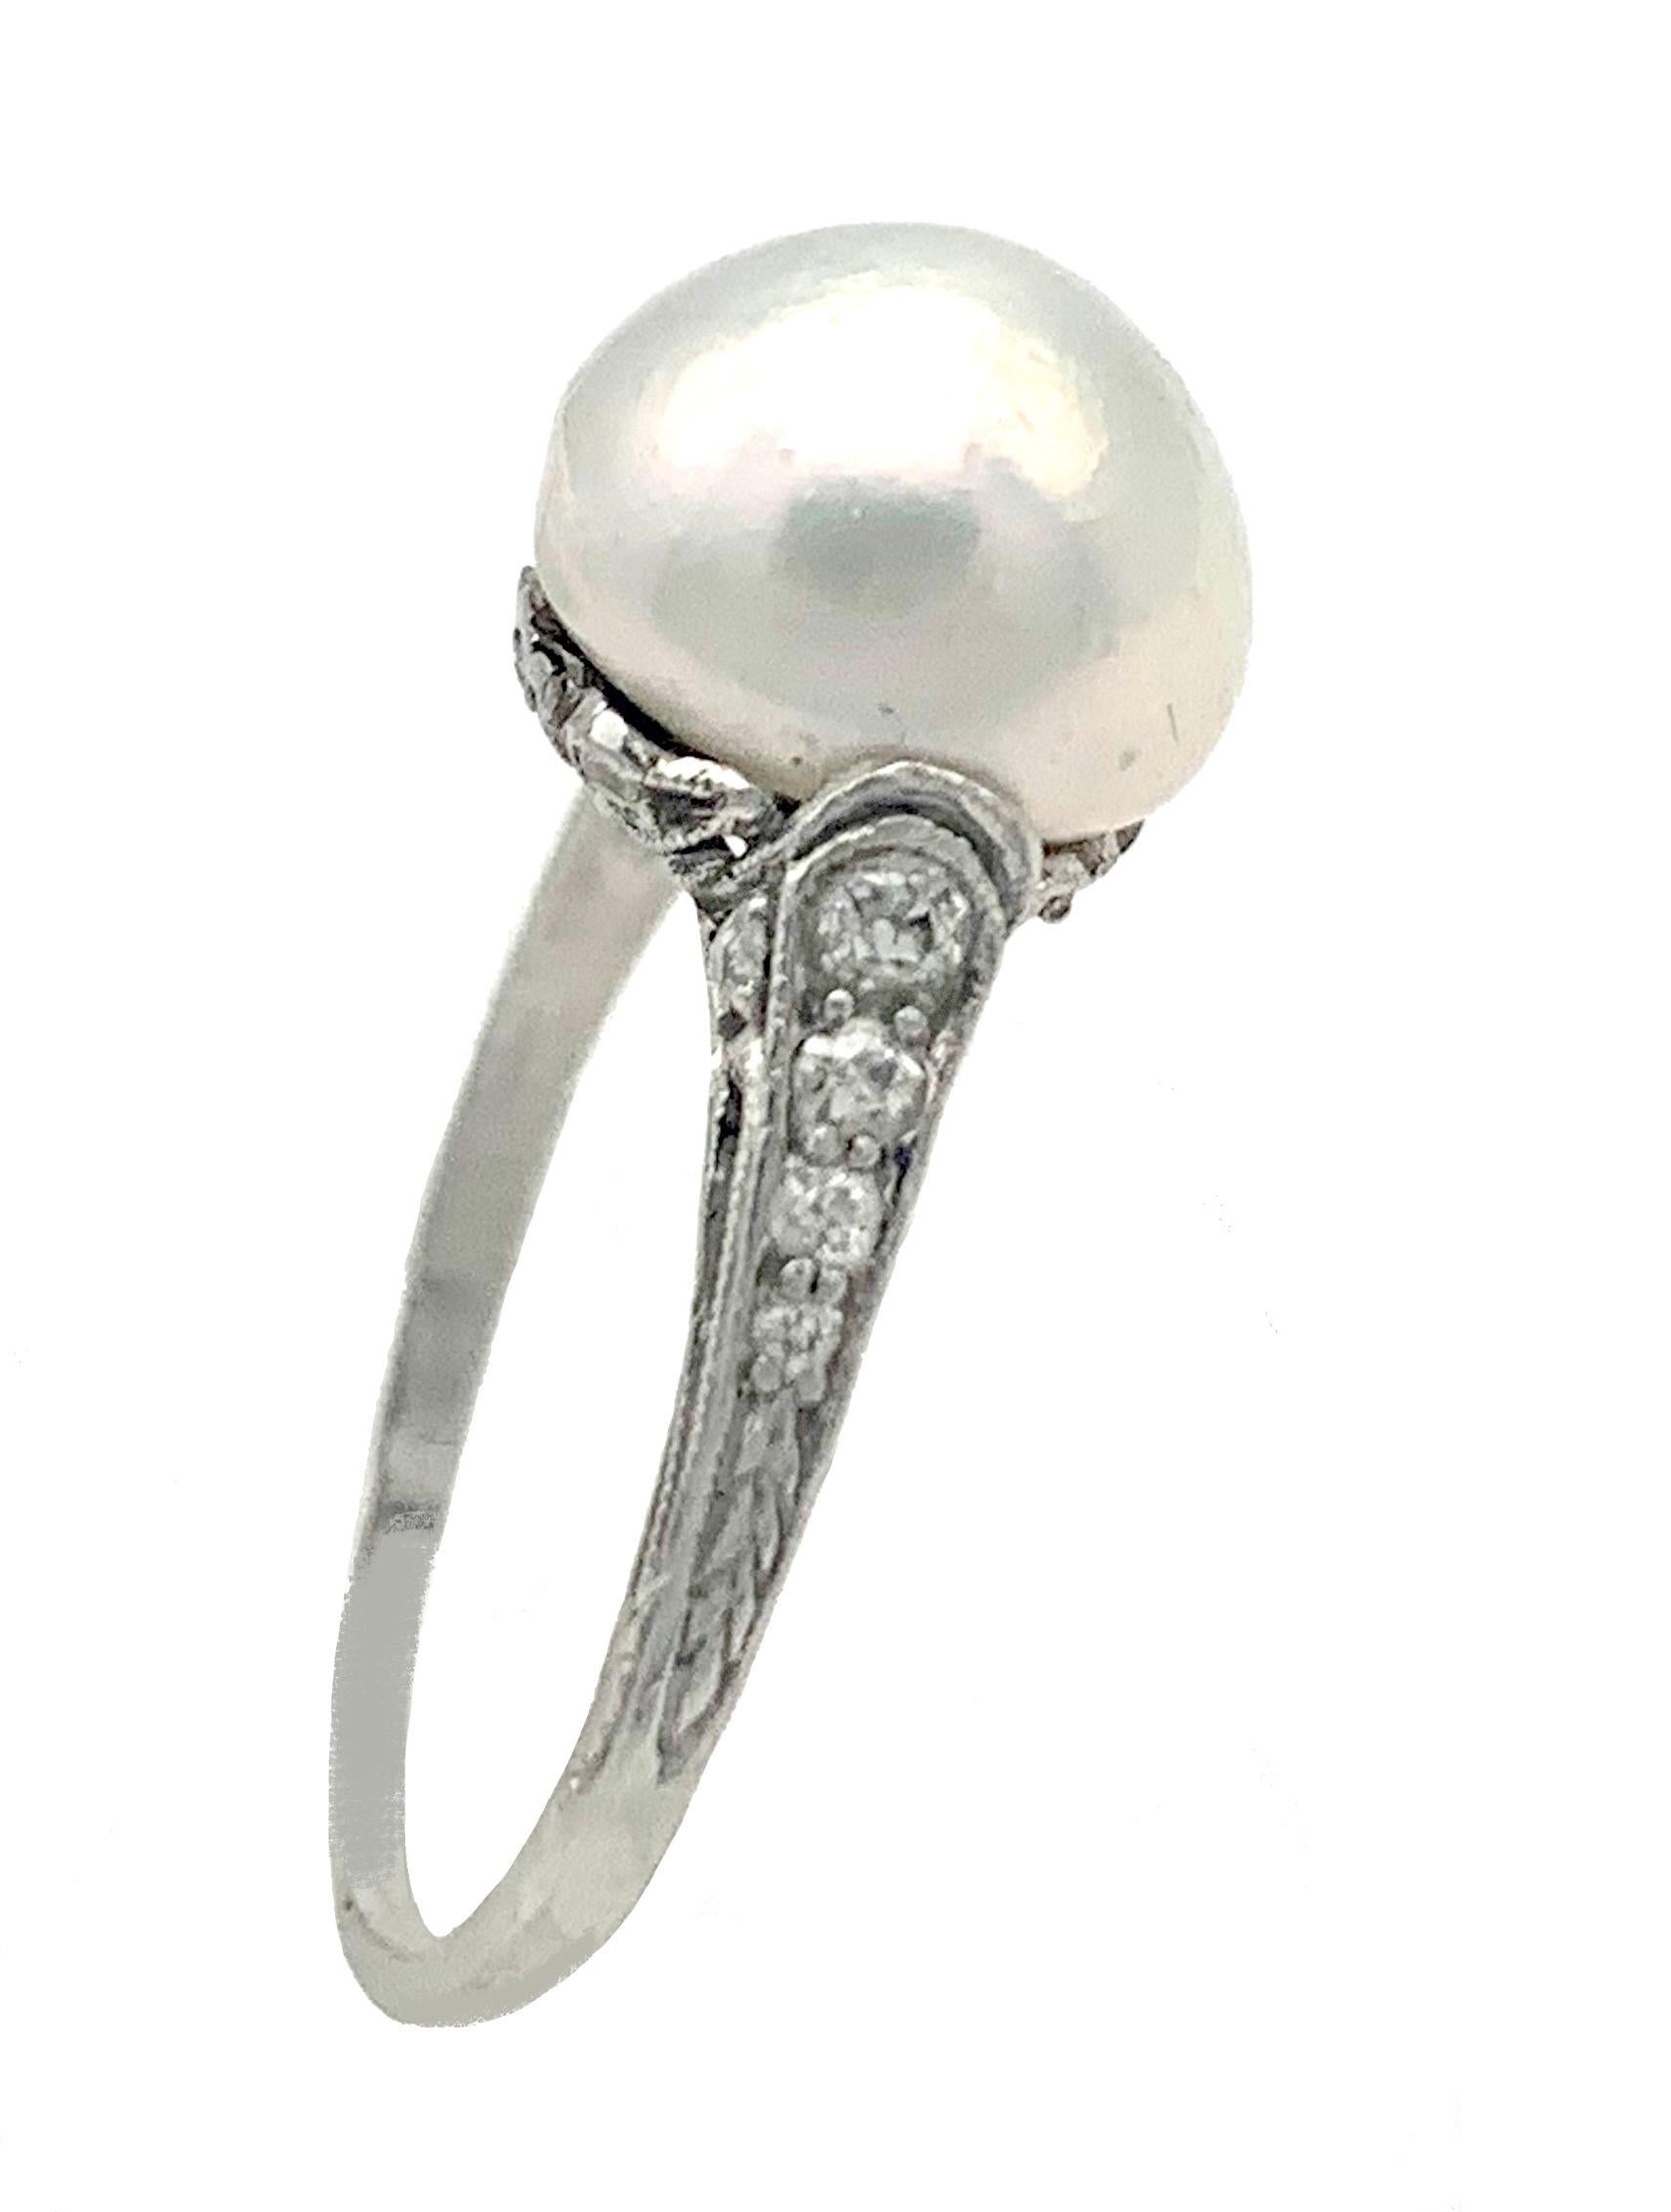 This elegant Belle Époque ring was crafted around 1900.
It is made from platinum and is set with a beautiful white natural oriental salt water bouton pearl. The bouton pearl has a balanced harmonious perfect shape. The surface radiates a wonderful